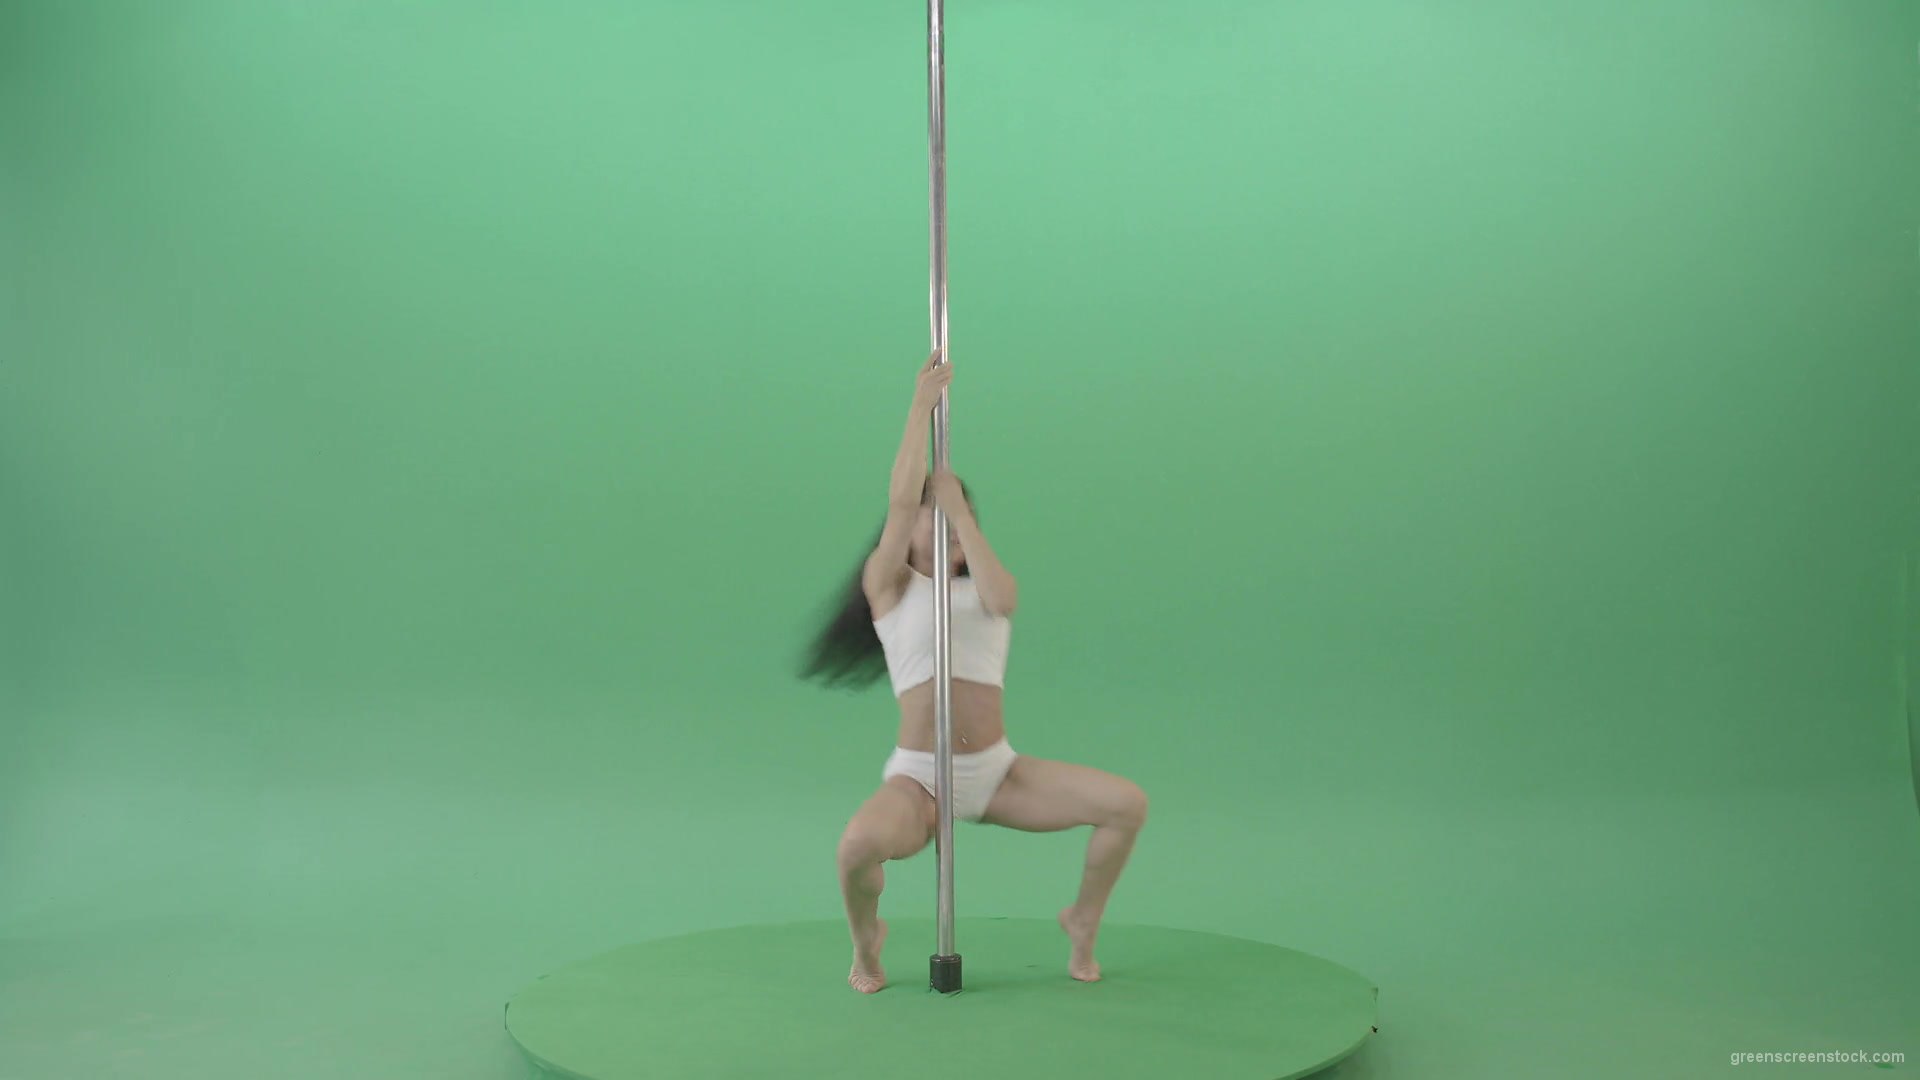 Young-woman-spinning-in-pole-dance-on-green-screen-1920_009 Green Screen Stock